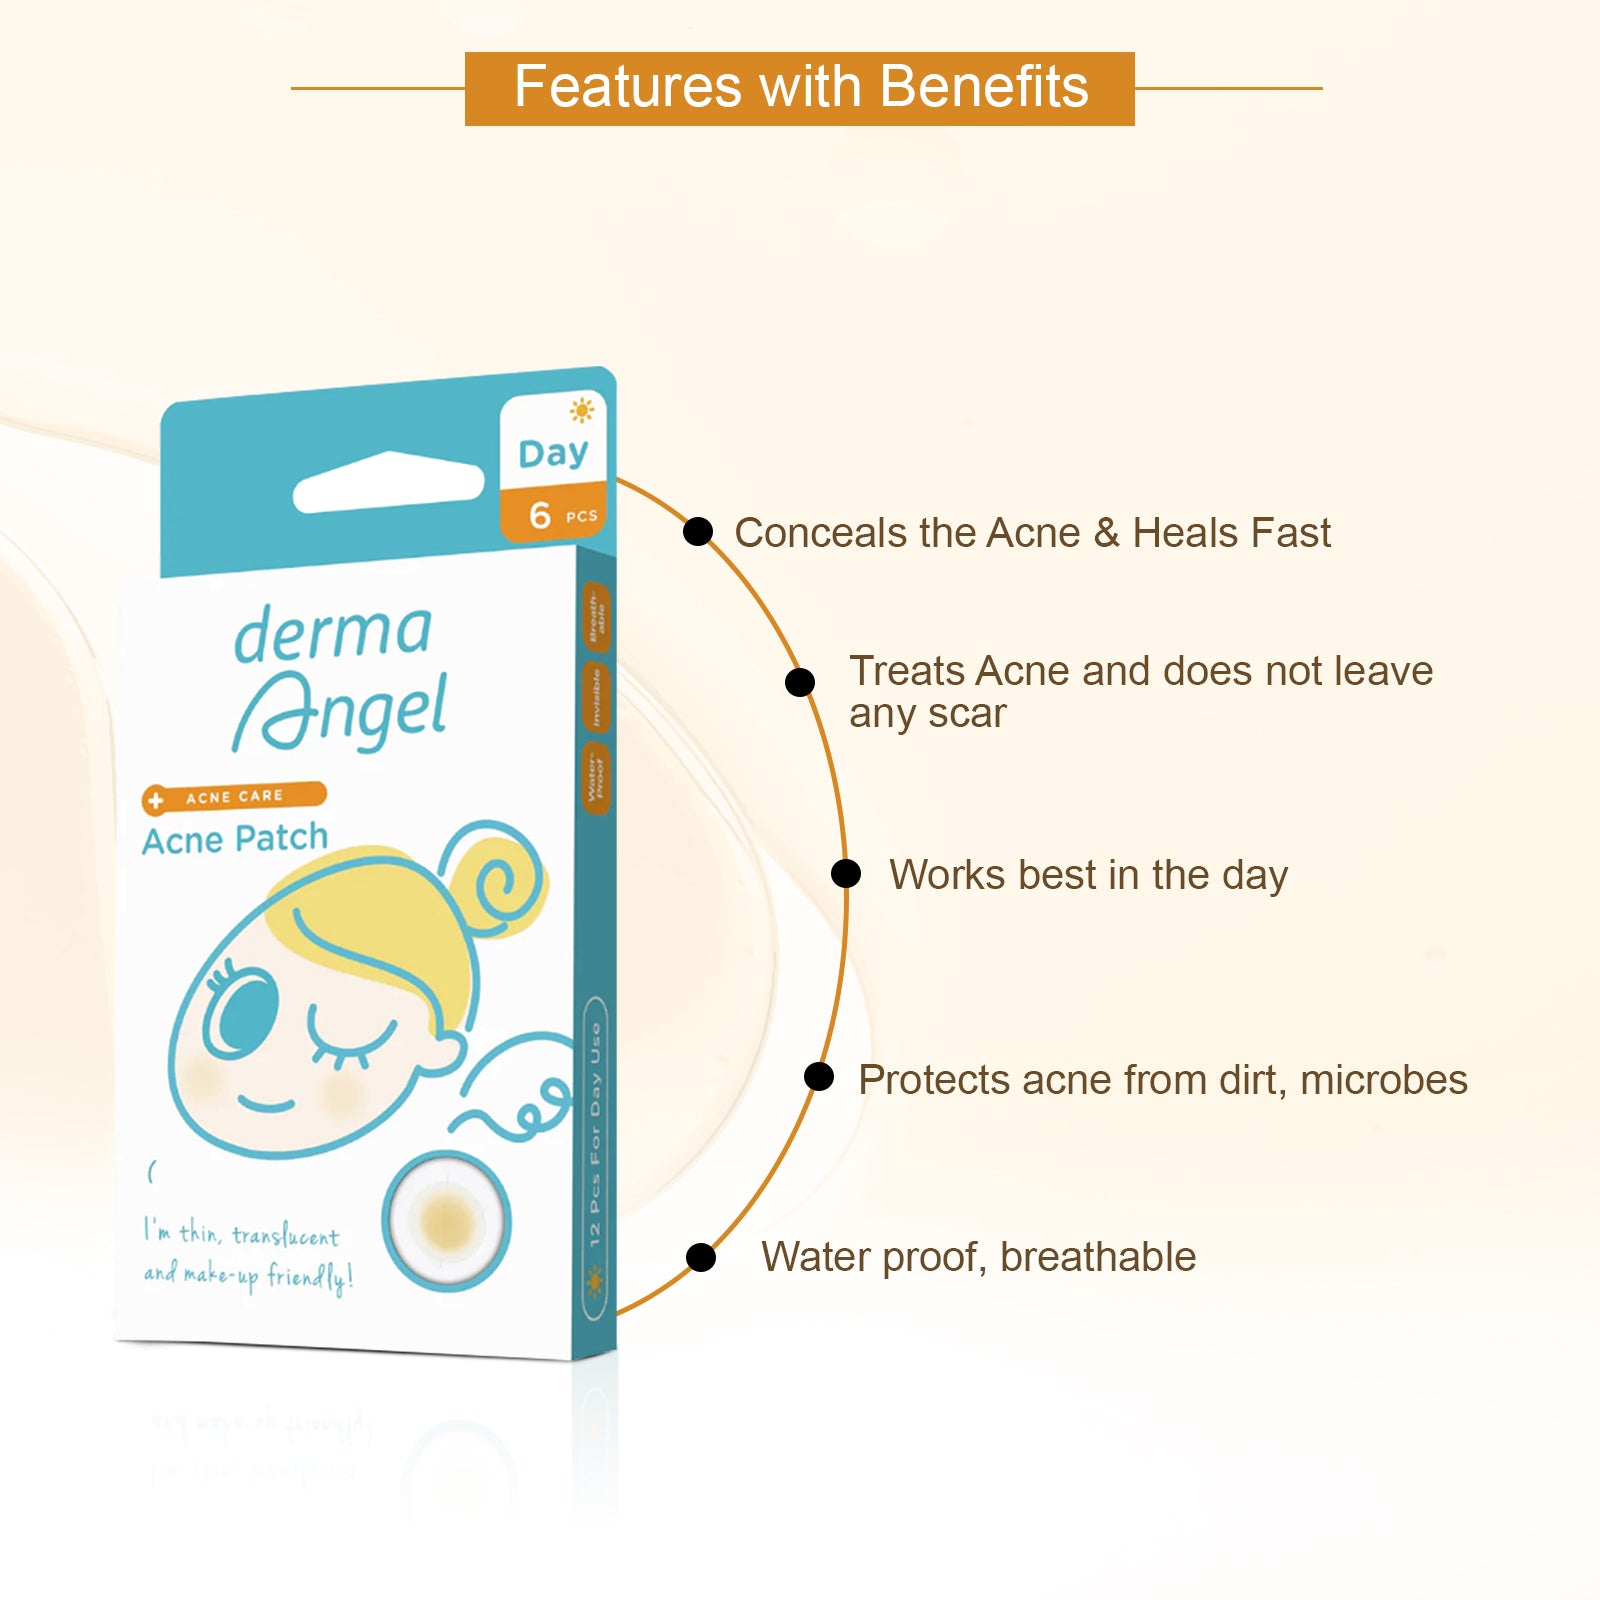 Derma Angel Acne Patches (Day Usage)